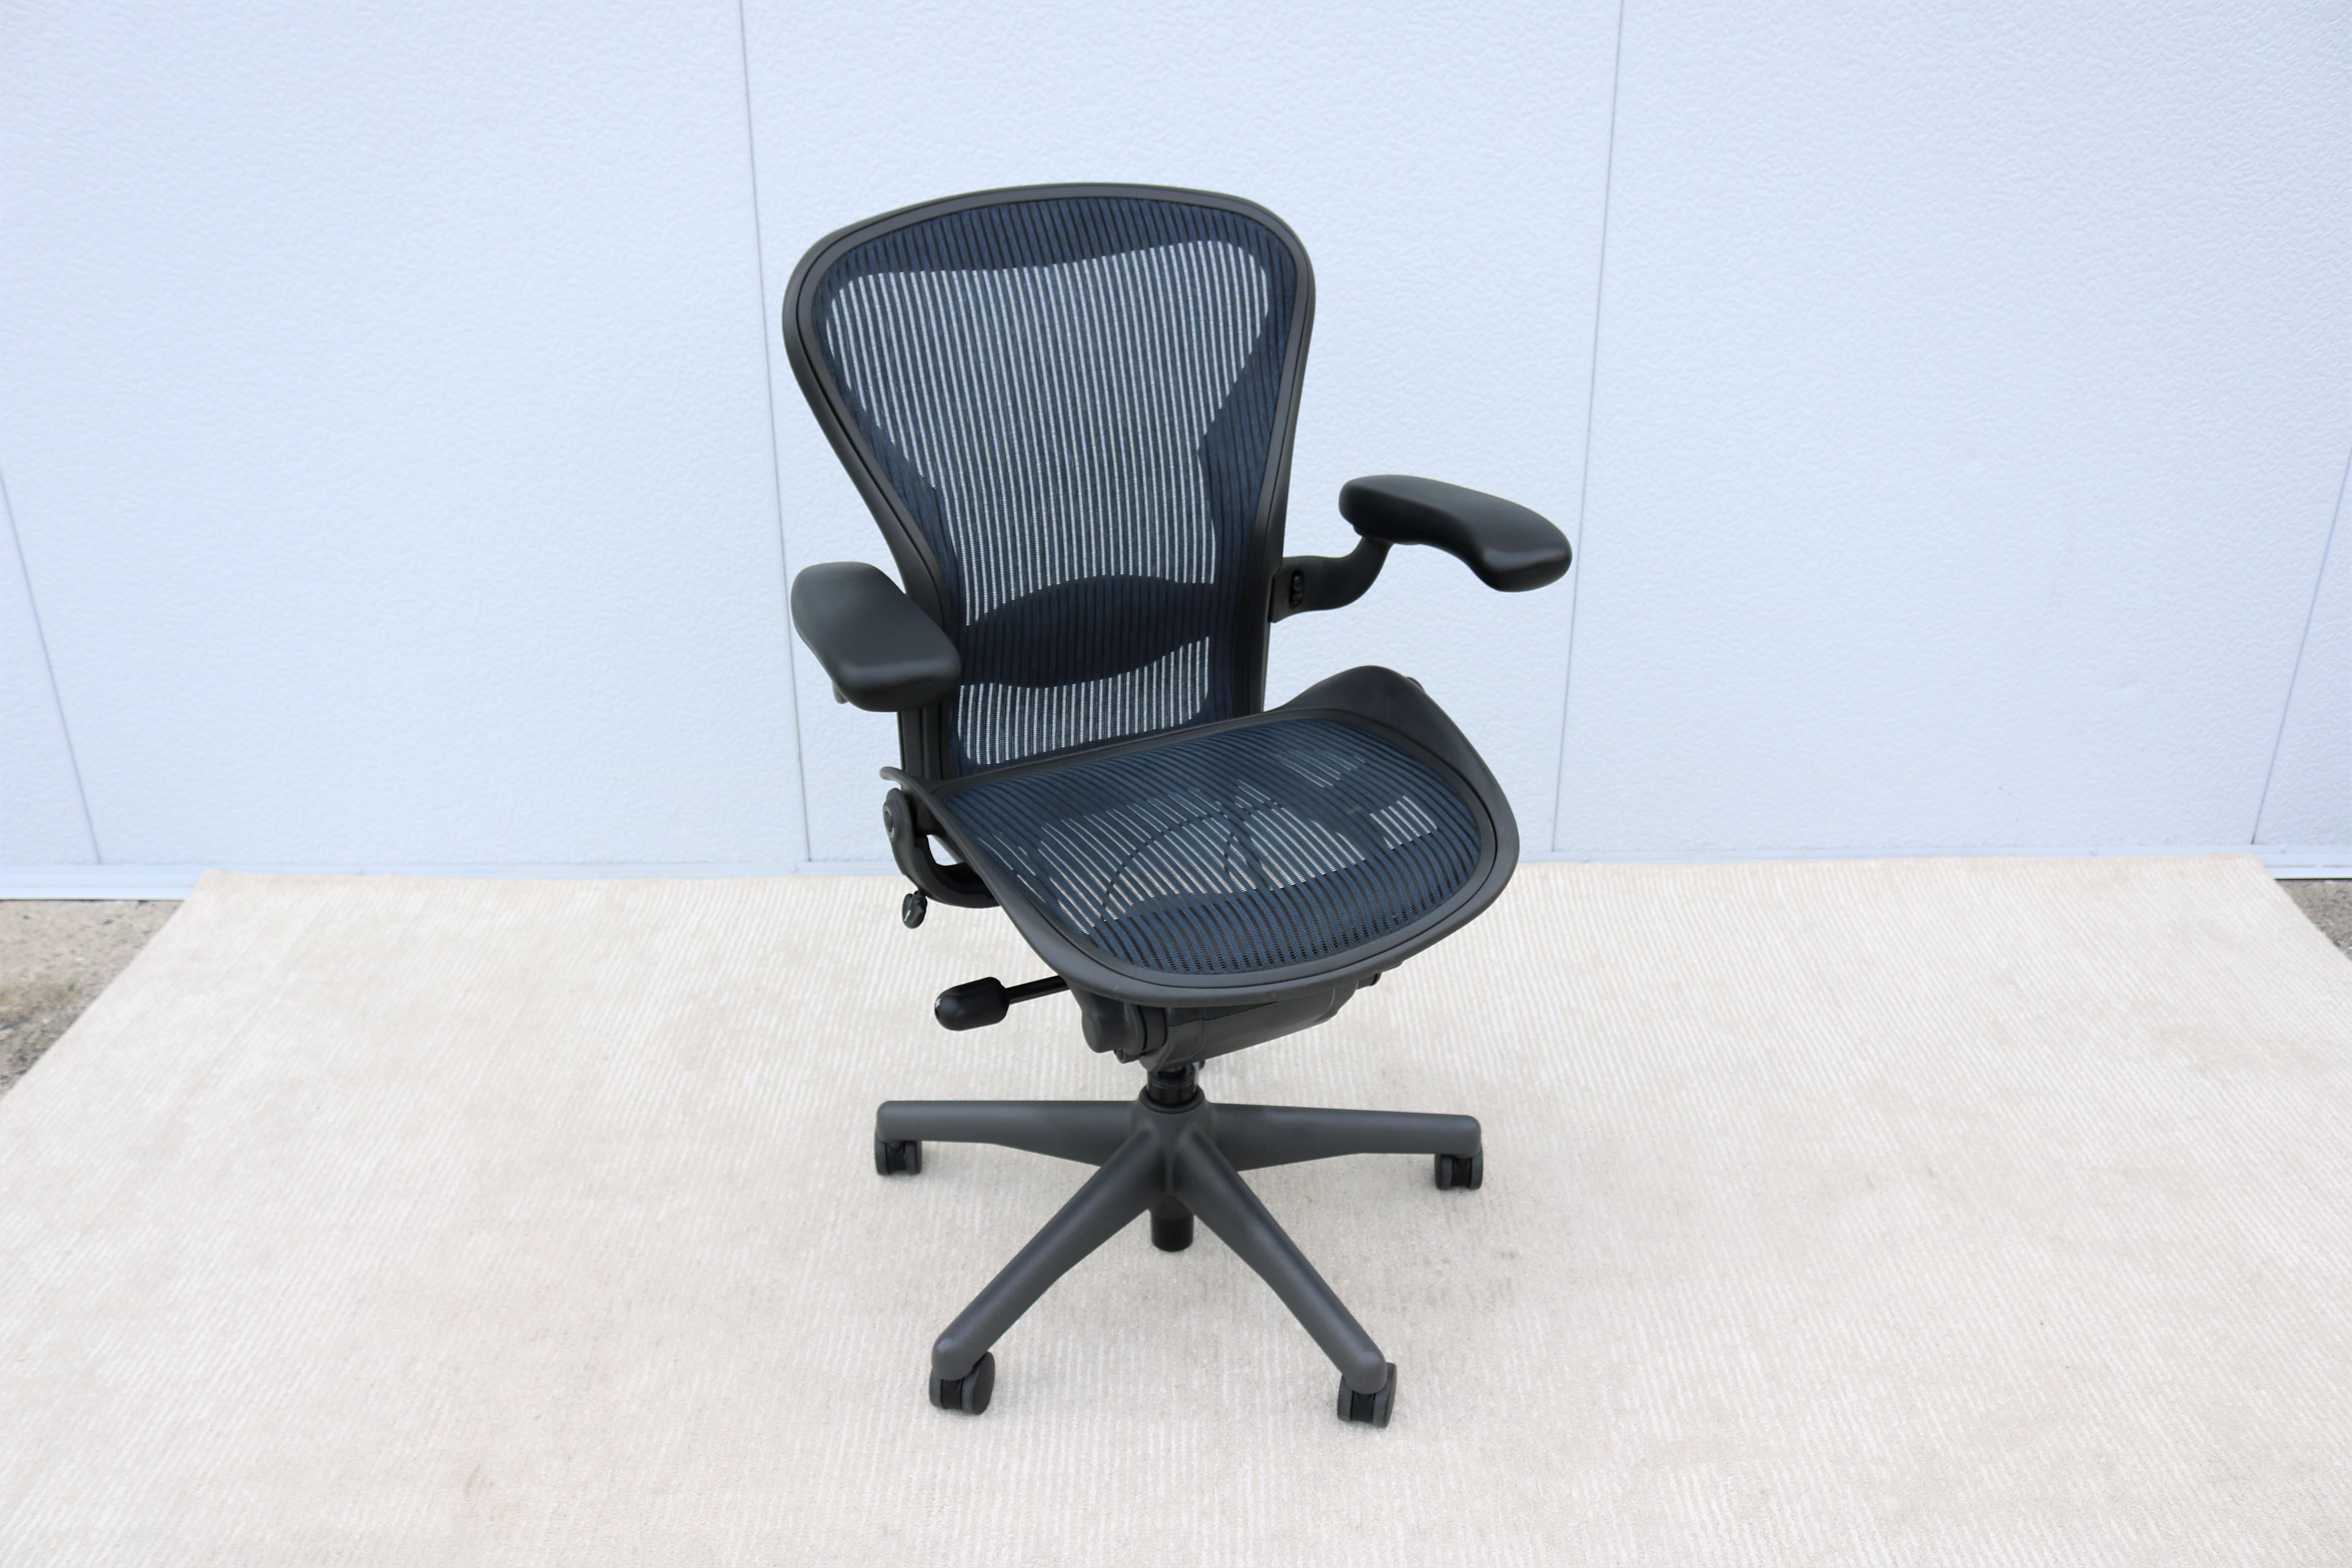 Aeron chair size (B) fully loaded with all adjustments by Herman Miller.
It's the best and most admired and recognized ergonomic office chair ever made.
Its innovative design and support for a range of postures, activities, and body types, have made